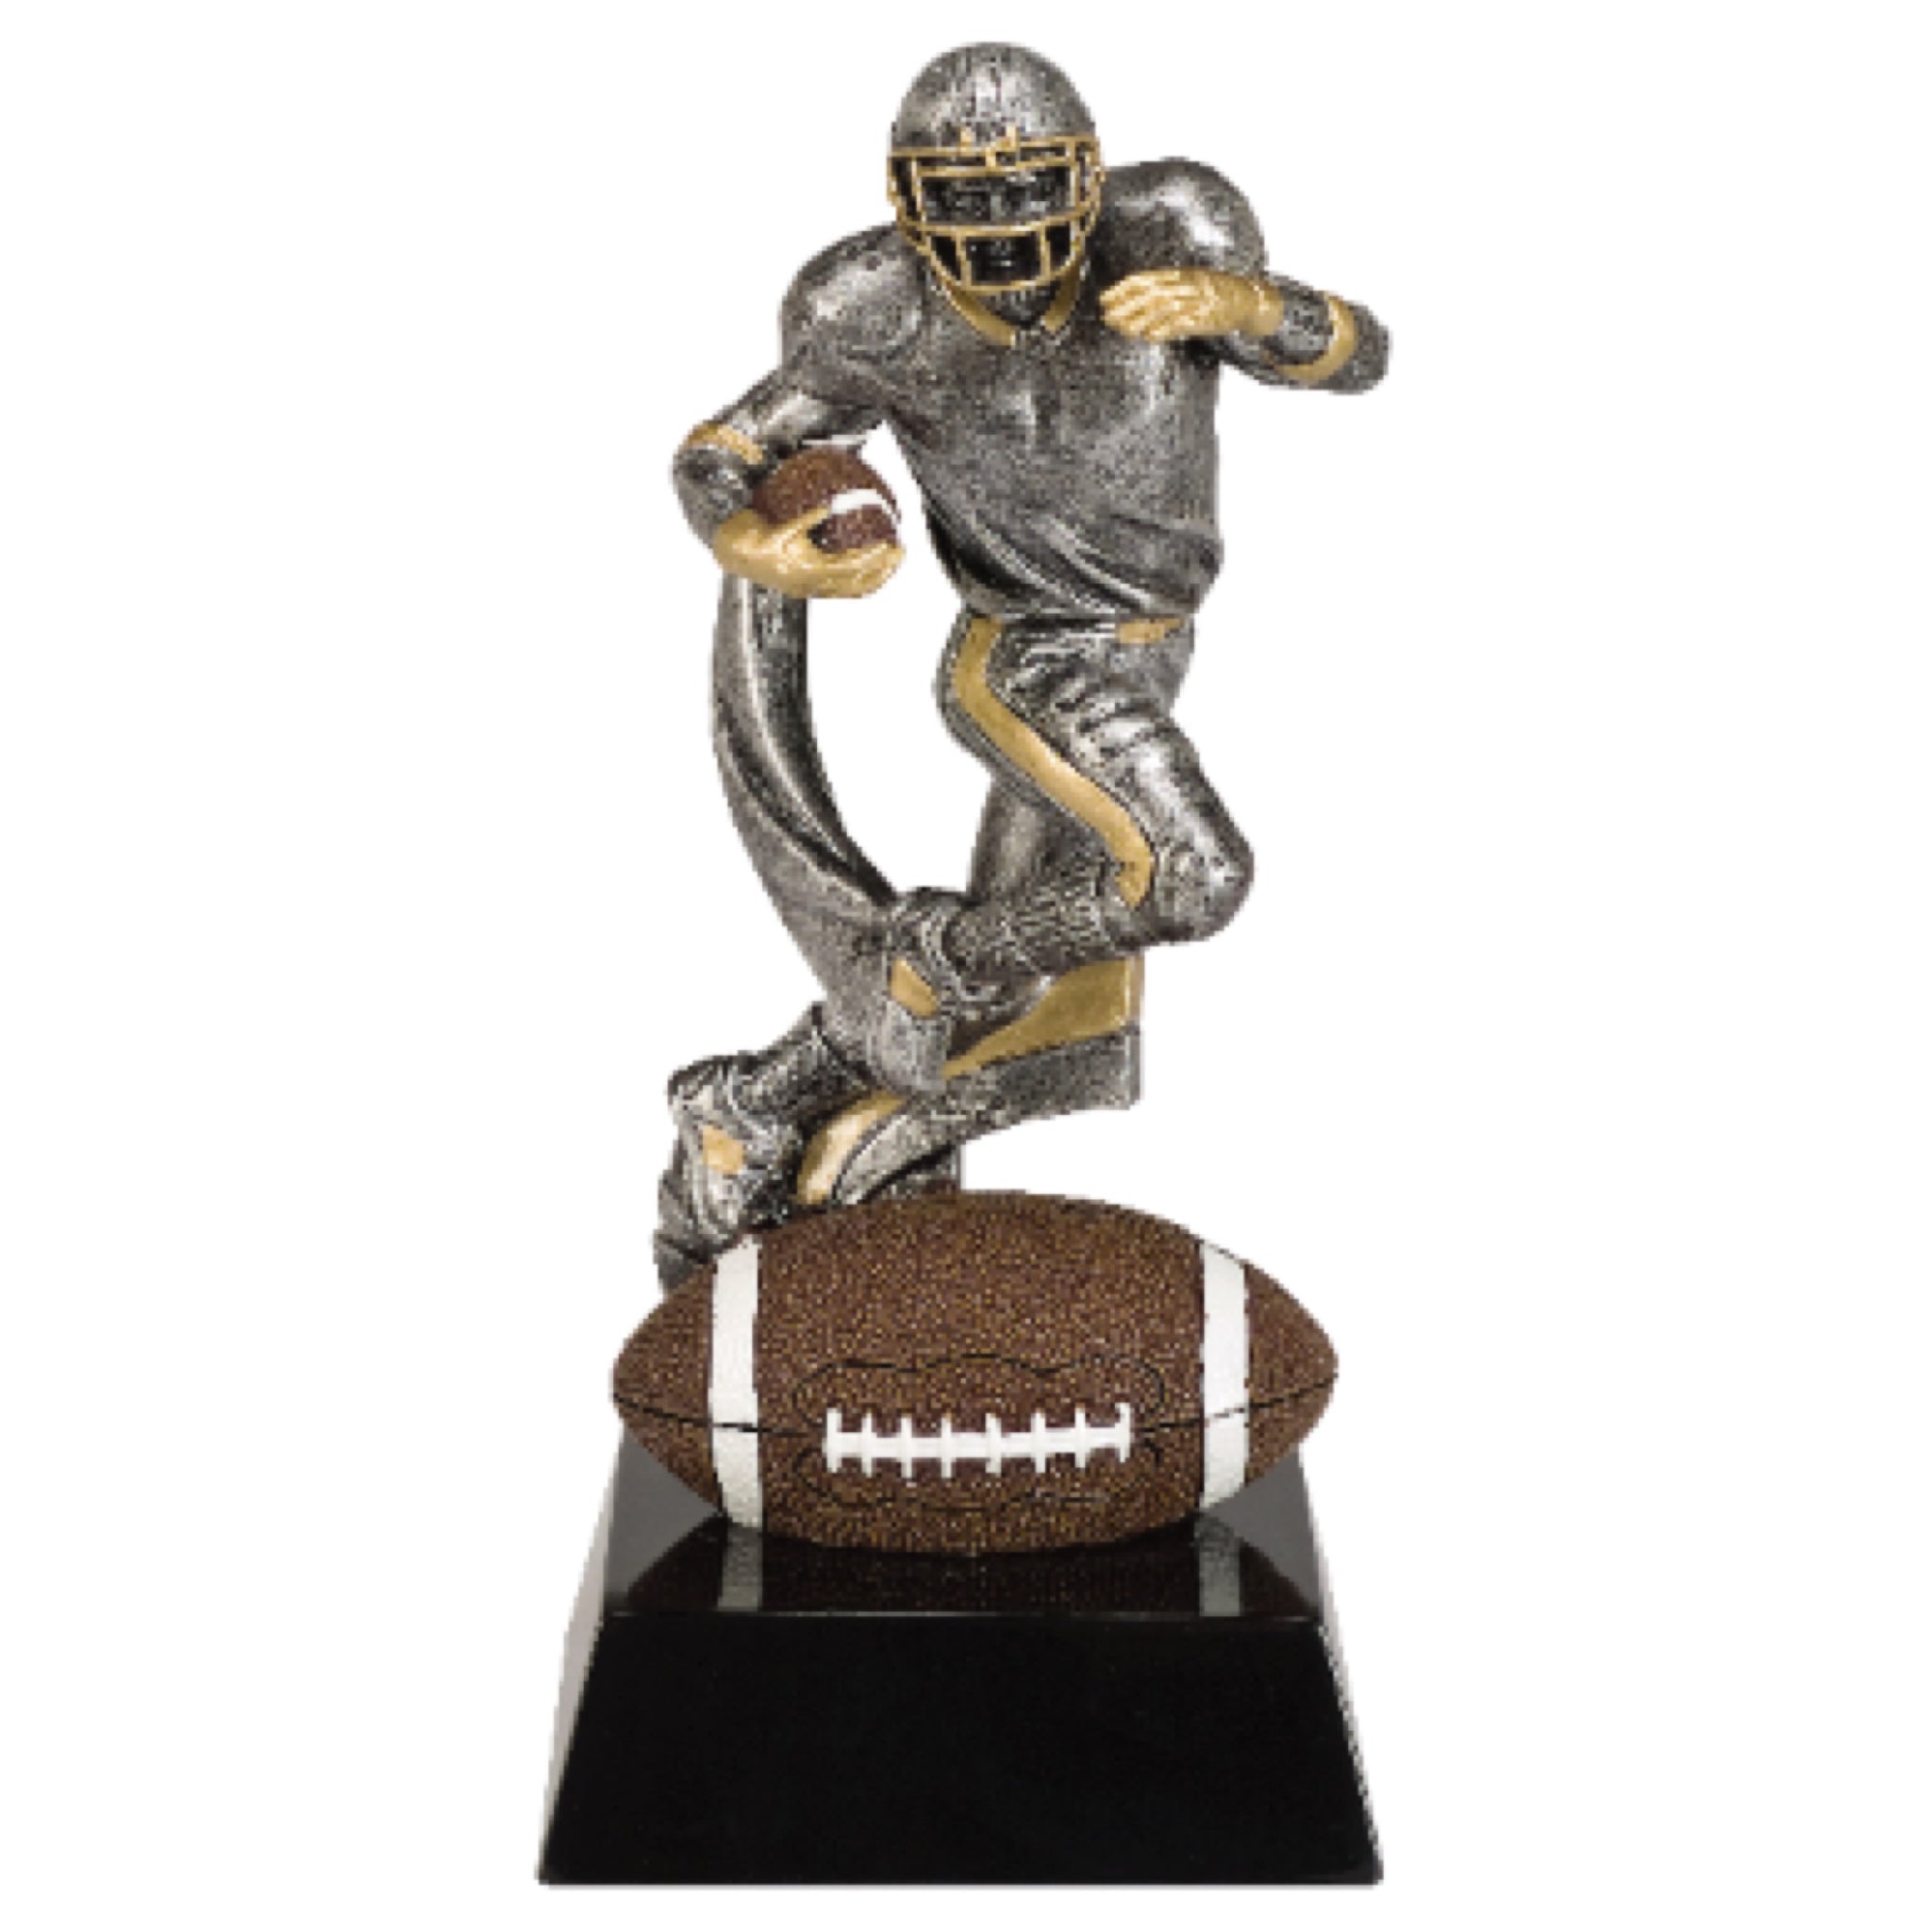 Football trophy featuring a black square base, a brown football at the bottom, and a silver football player running and jumping with a football in one arm.